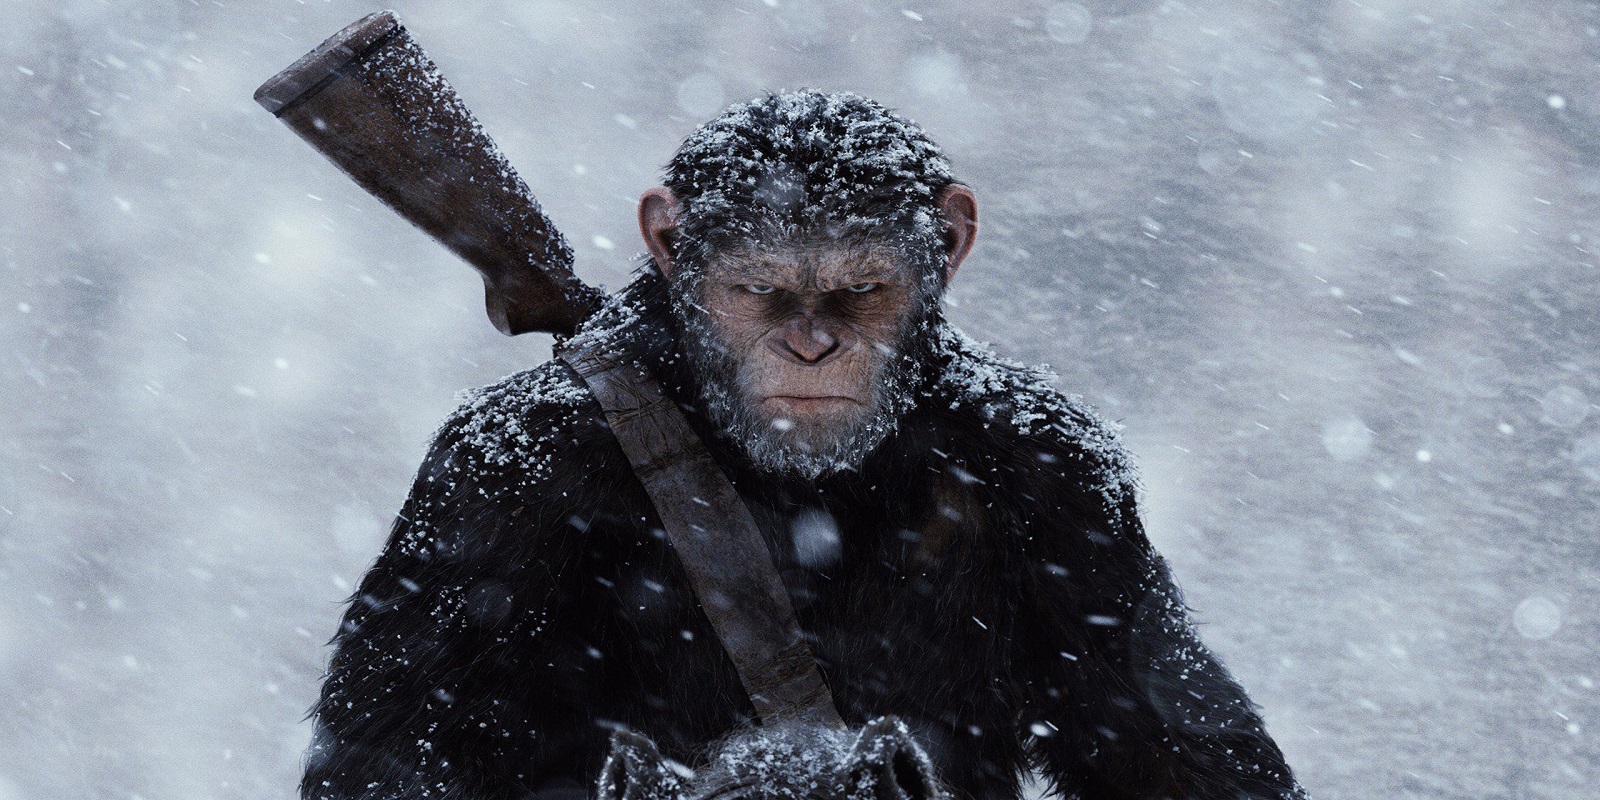 War for the Planet of the Apes Scannain Review